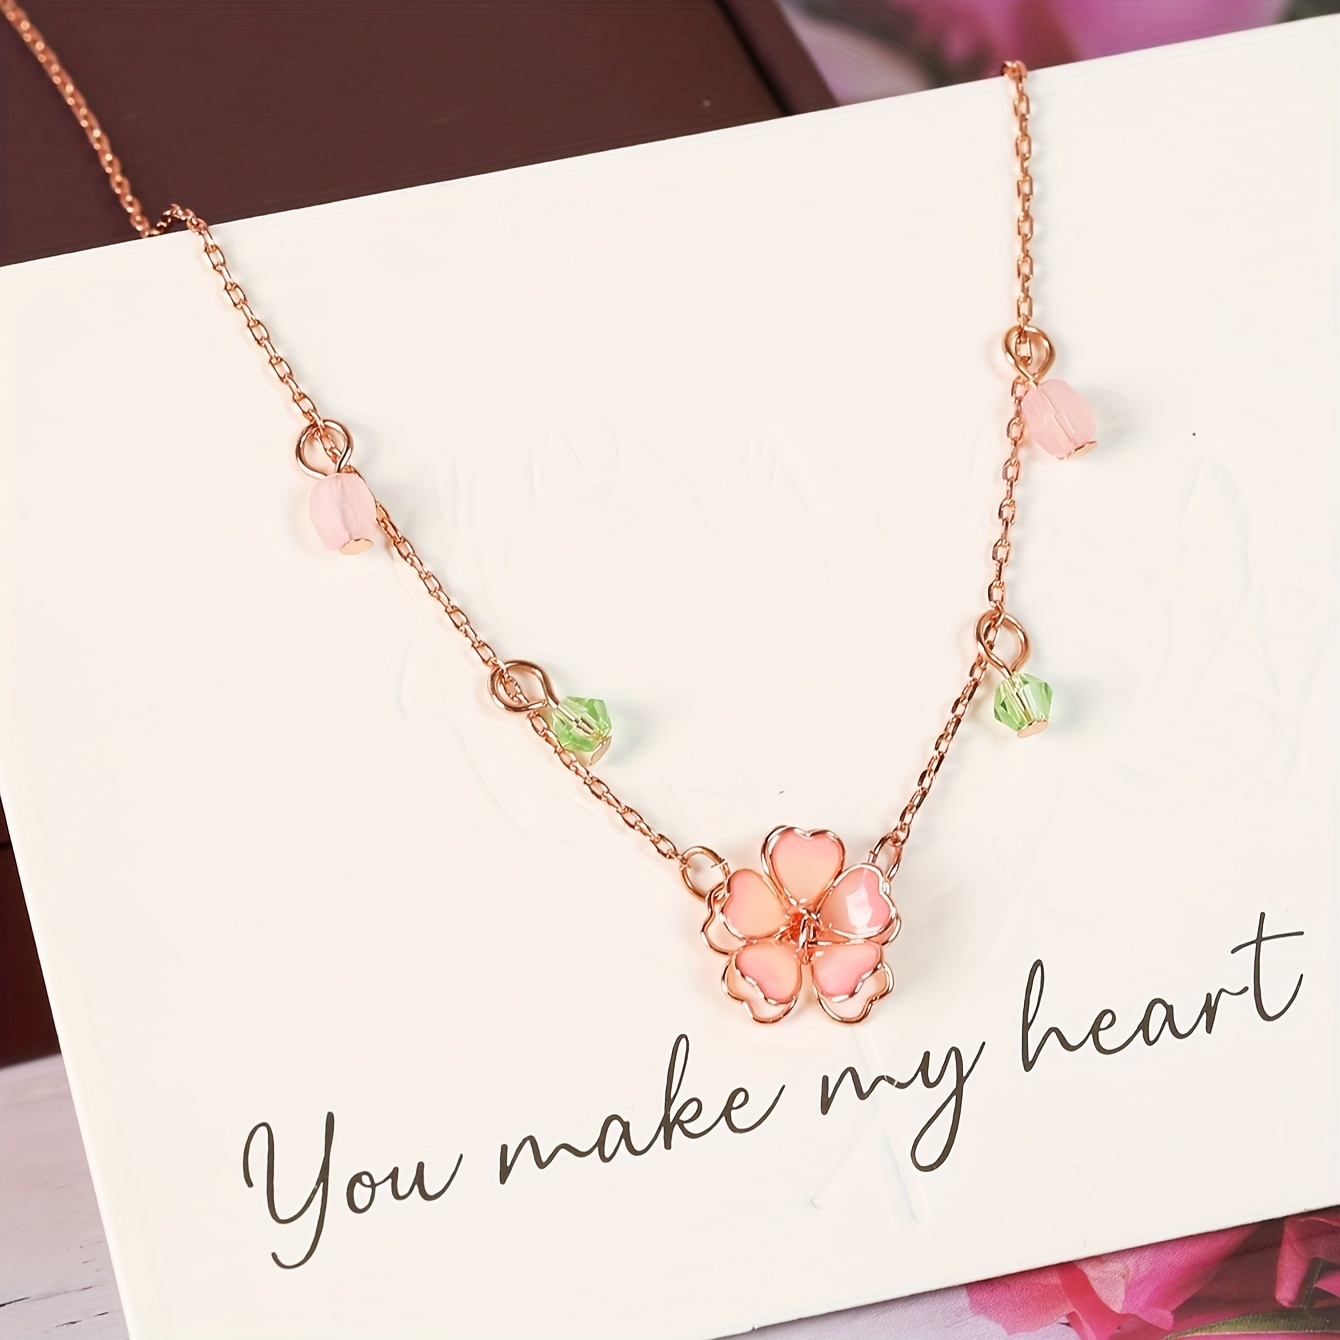 

Elegant & Cute Tulip Flower Faux Pearl Necklace For Women, Summer Peach Blossom Pendant Clavicle Chain Necklace Neck Accessory